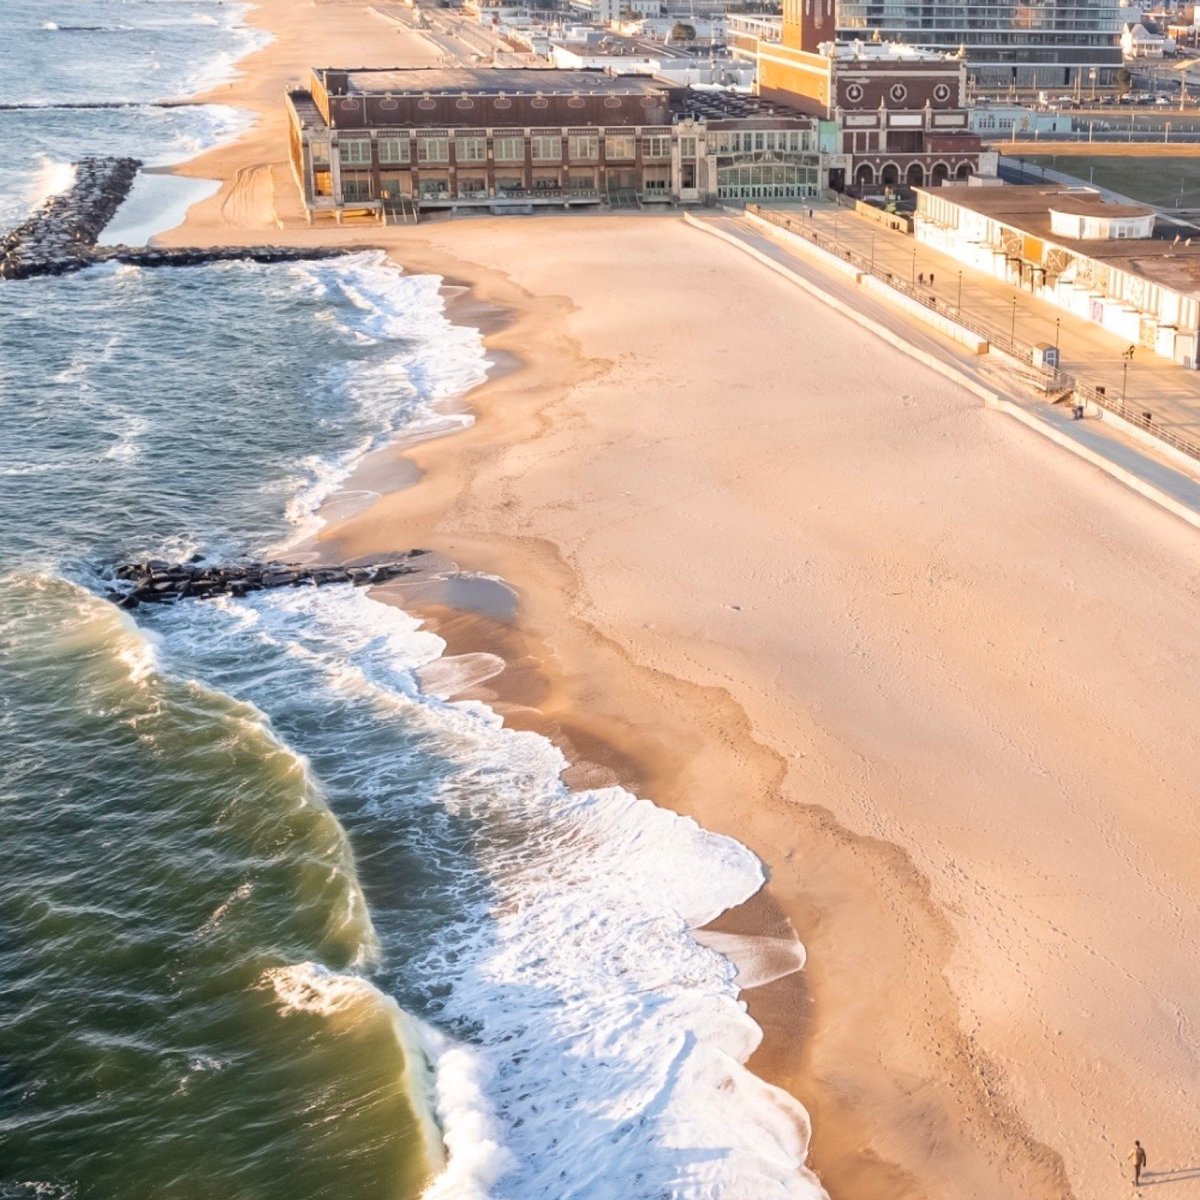 New Jersey and summer just fit together, like puzzle pieces! The city of Asbury Park is getting its life back. Check it out. #VisitNJ #AsburyParkNJ #JerseyShore 📷: IG connorkanephotography